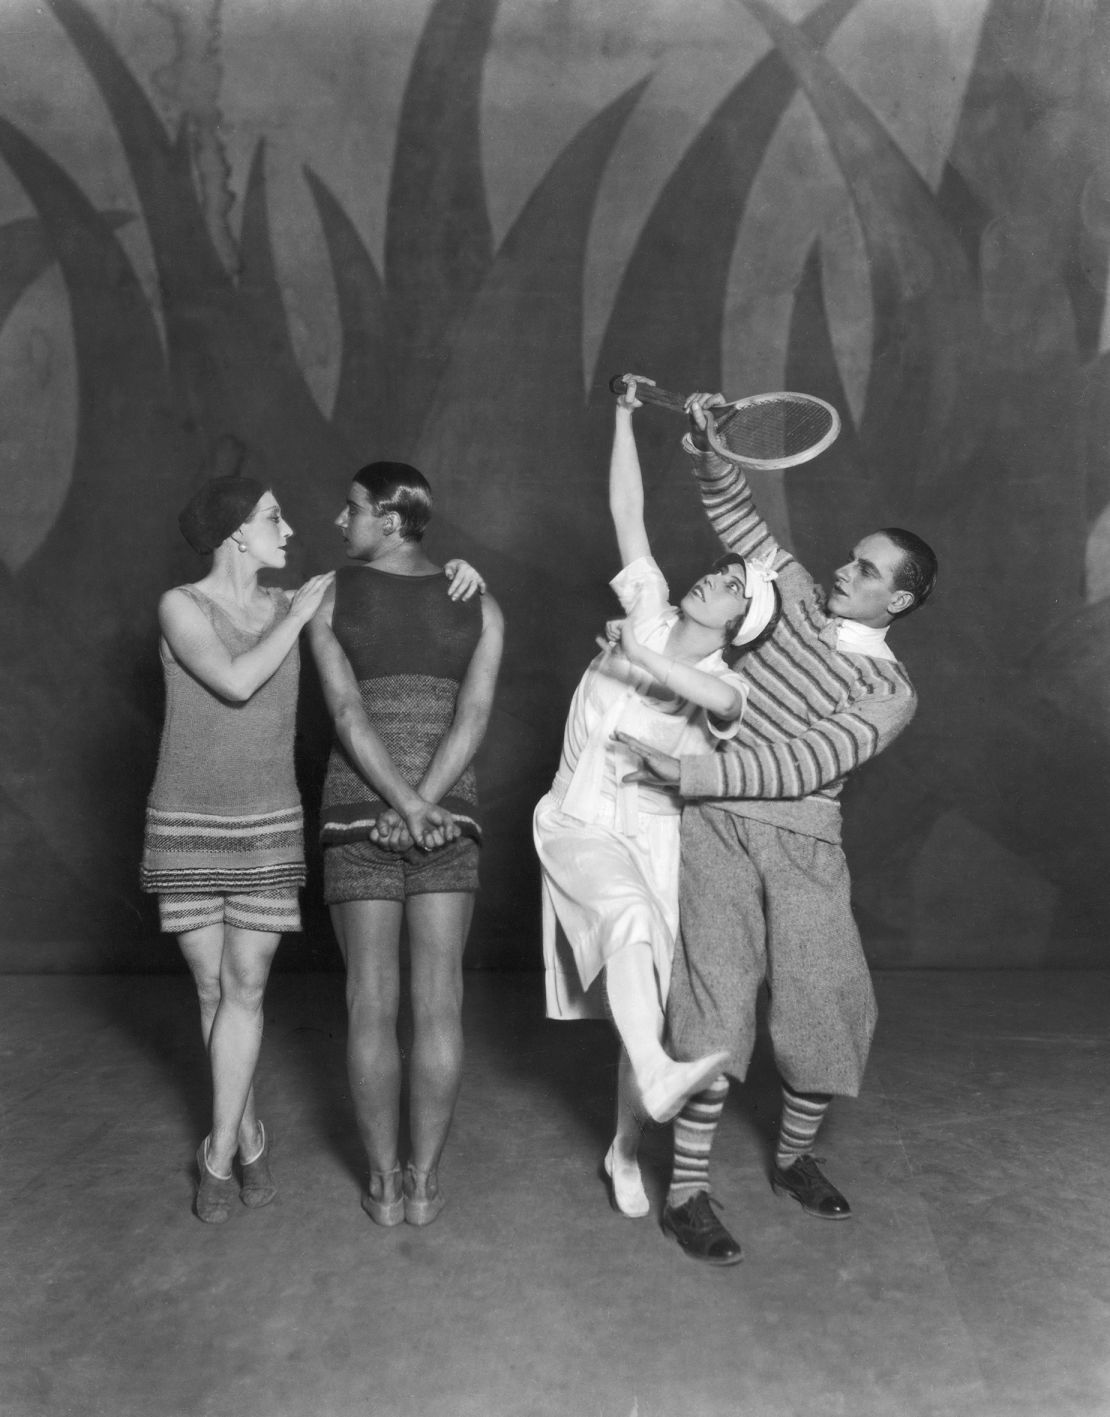 L-R: Lydia Sokolova (born Hilda Munnings, 1896 - 1974), Anton Dolin (1904 - 1983), Bronislava Nijinska and Leon Woizikowsky in the Diaghilev Ballets Russes production of 'Le Train Bleu', London. Billed as an 'oper+tte dans+e' by Jean Cocteau, this was the ballet's only production. The roles of the tennis champion (Nijinska) and the golfer (Woizikowsky) were inspired by Suzanne Lenglen and Edward Prince of Wales respectively. Music by Darius Milhaud, choreography by Bronislava Nijinska, costumes by Coco Chanel, and scenery by Henri Laurens.   (Photo by Sasha/Hulton Archive/Getty Images)